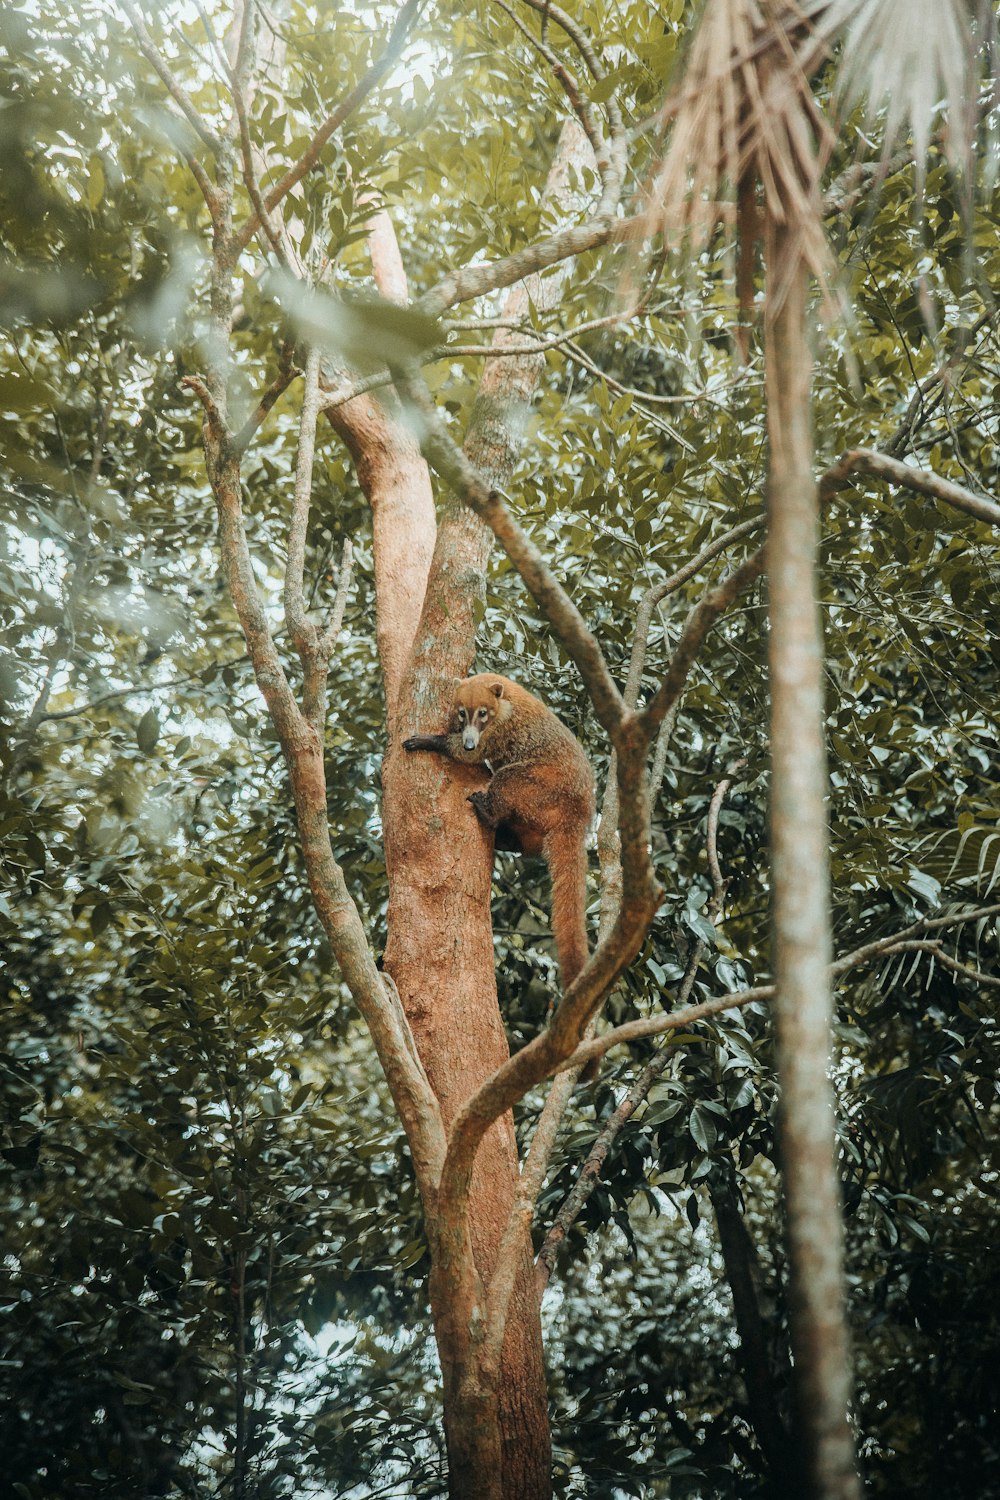 a monkey climbing up a tree in a forest